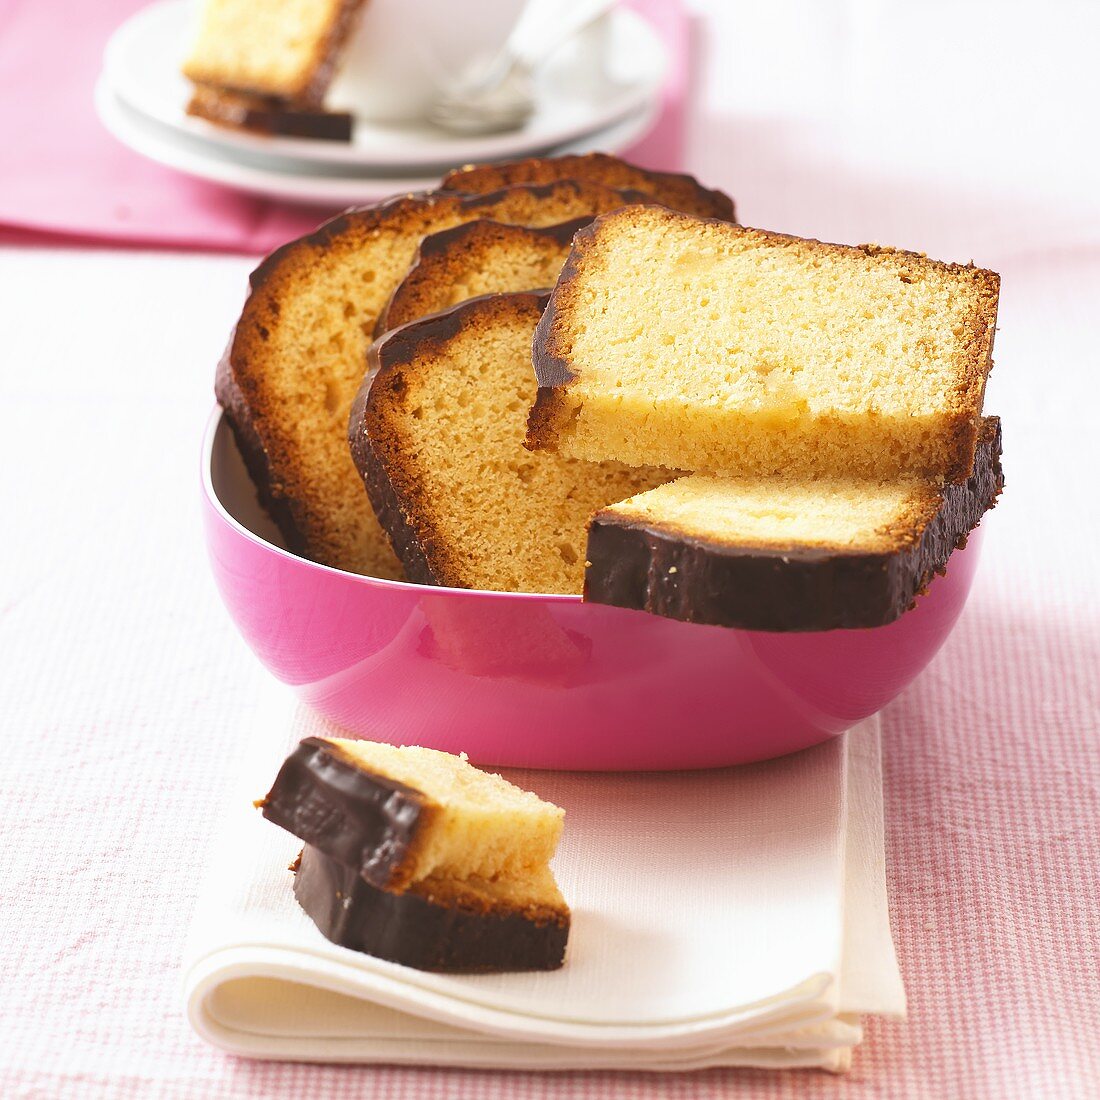 Several slices of marzipan cake with chocolate icing